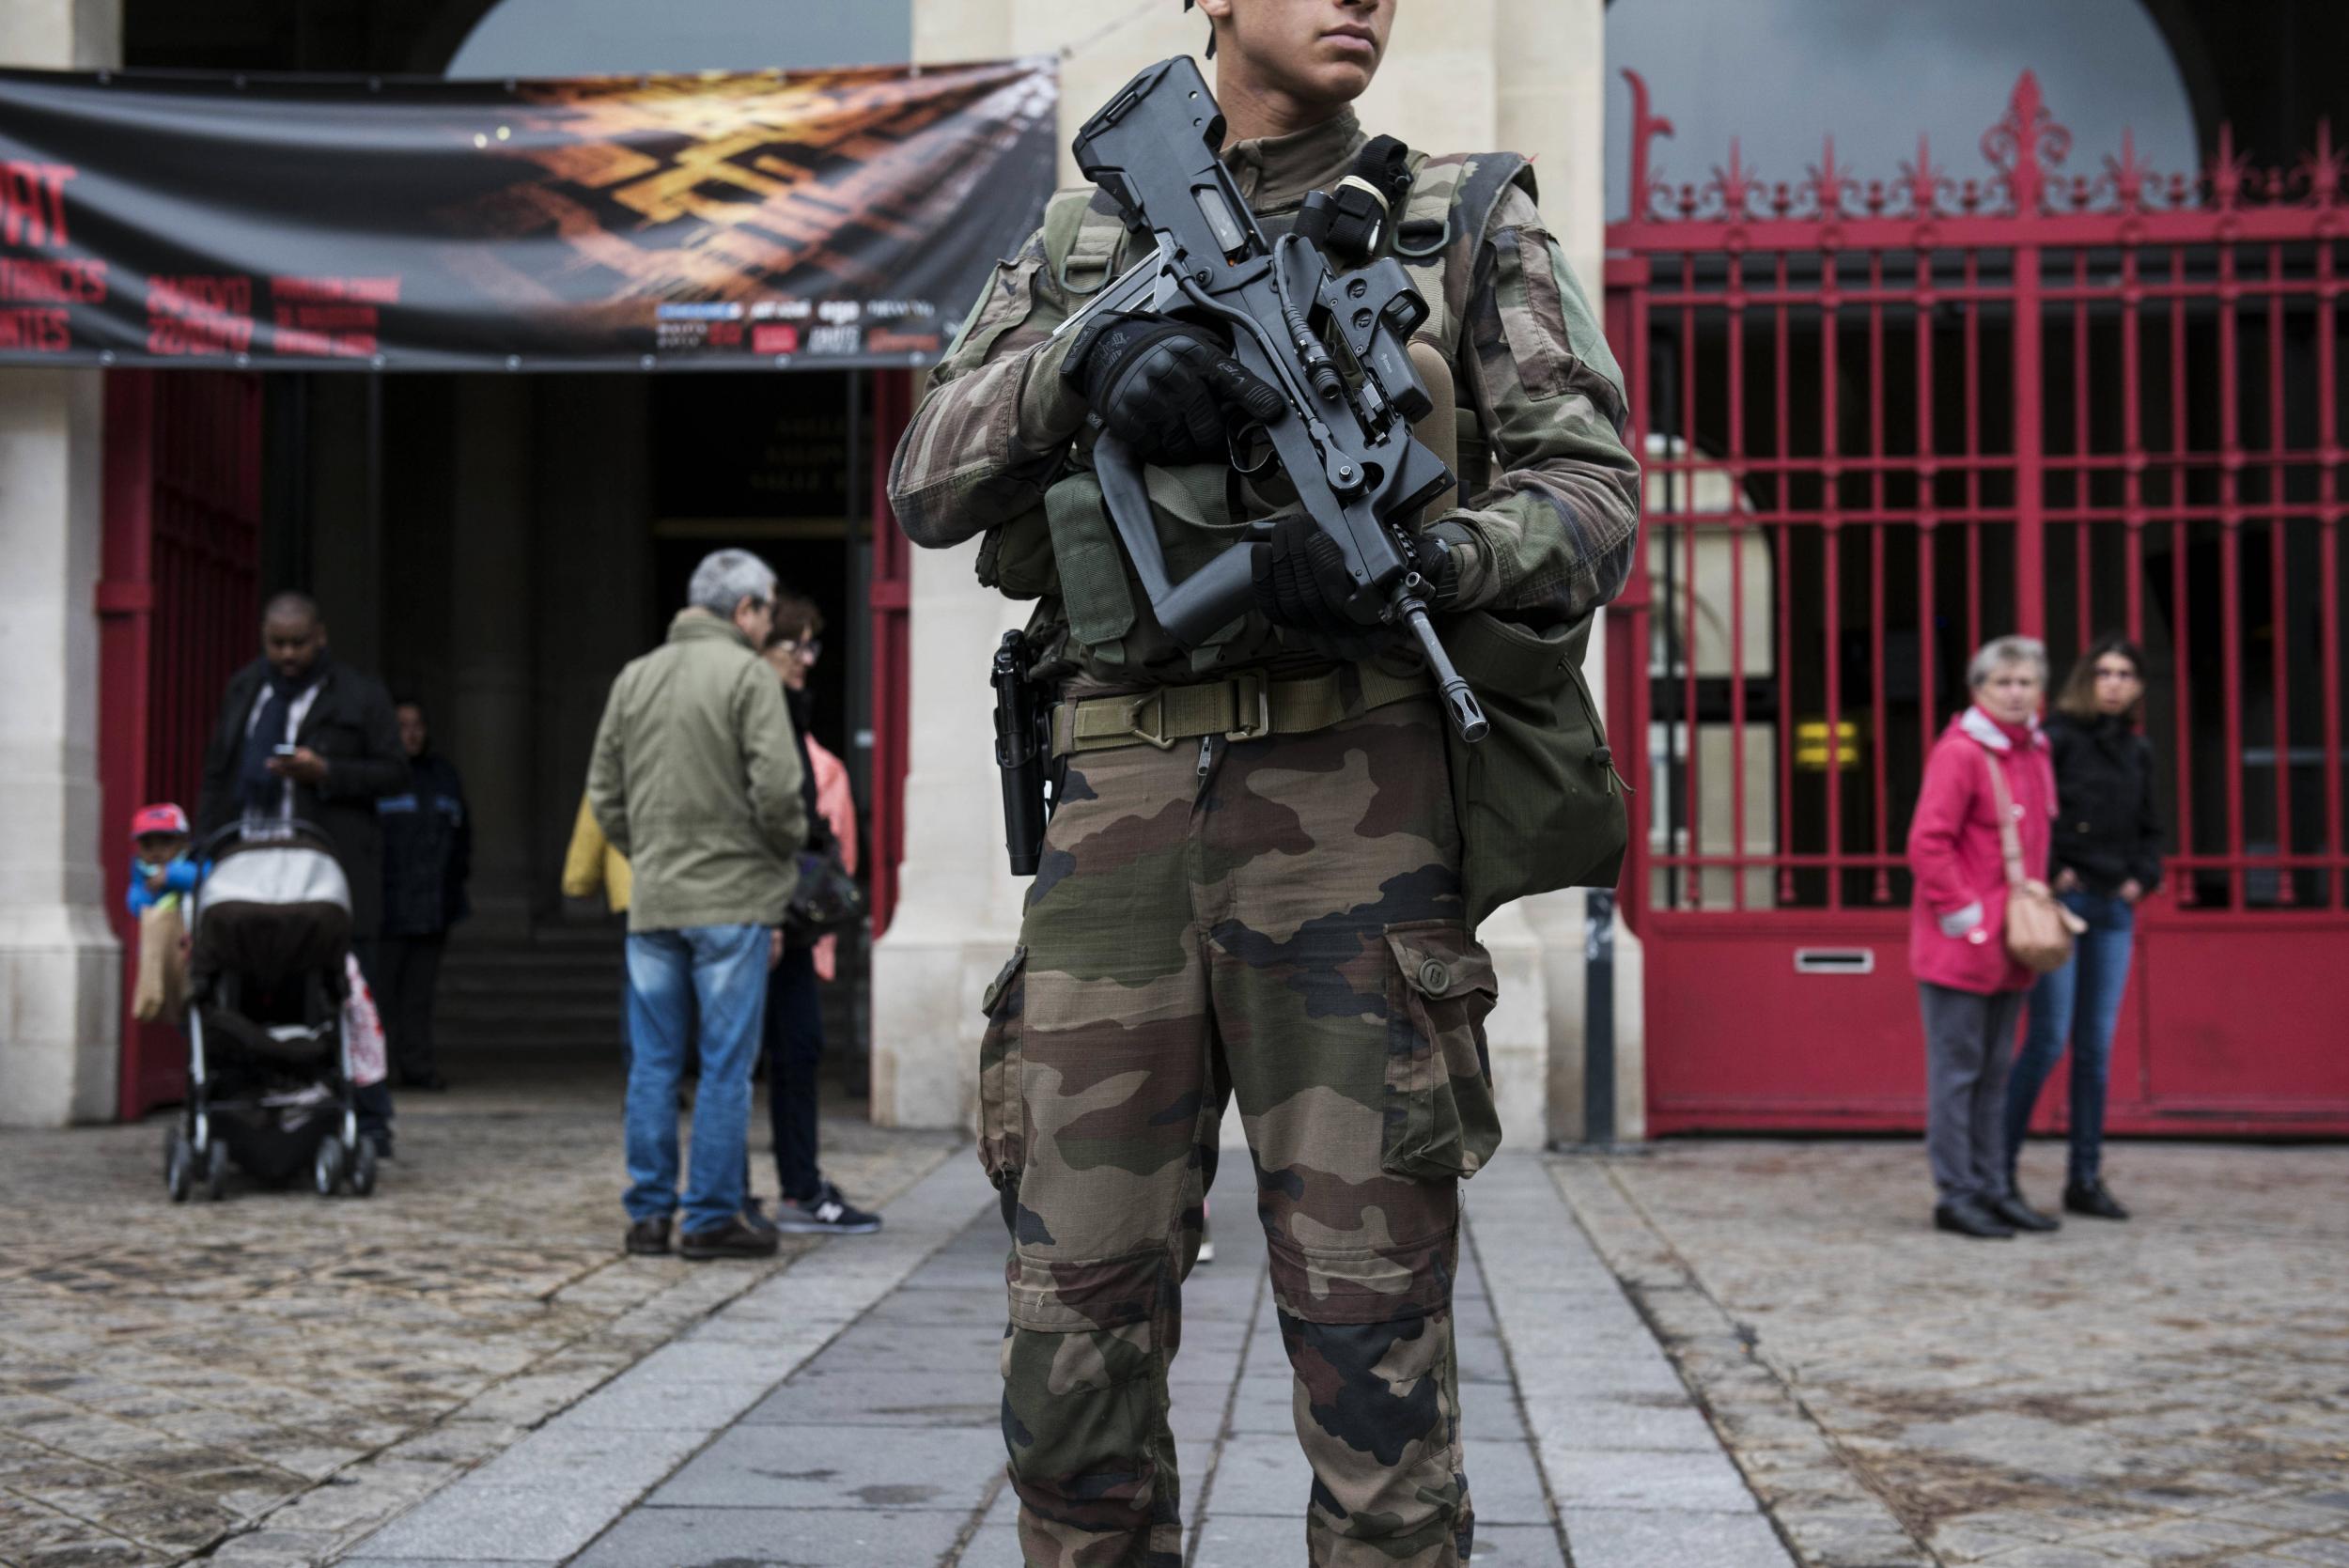 An armed French soldier stands guard outside of a polling station in Paris